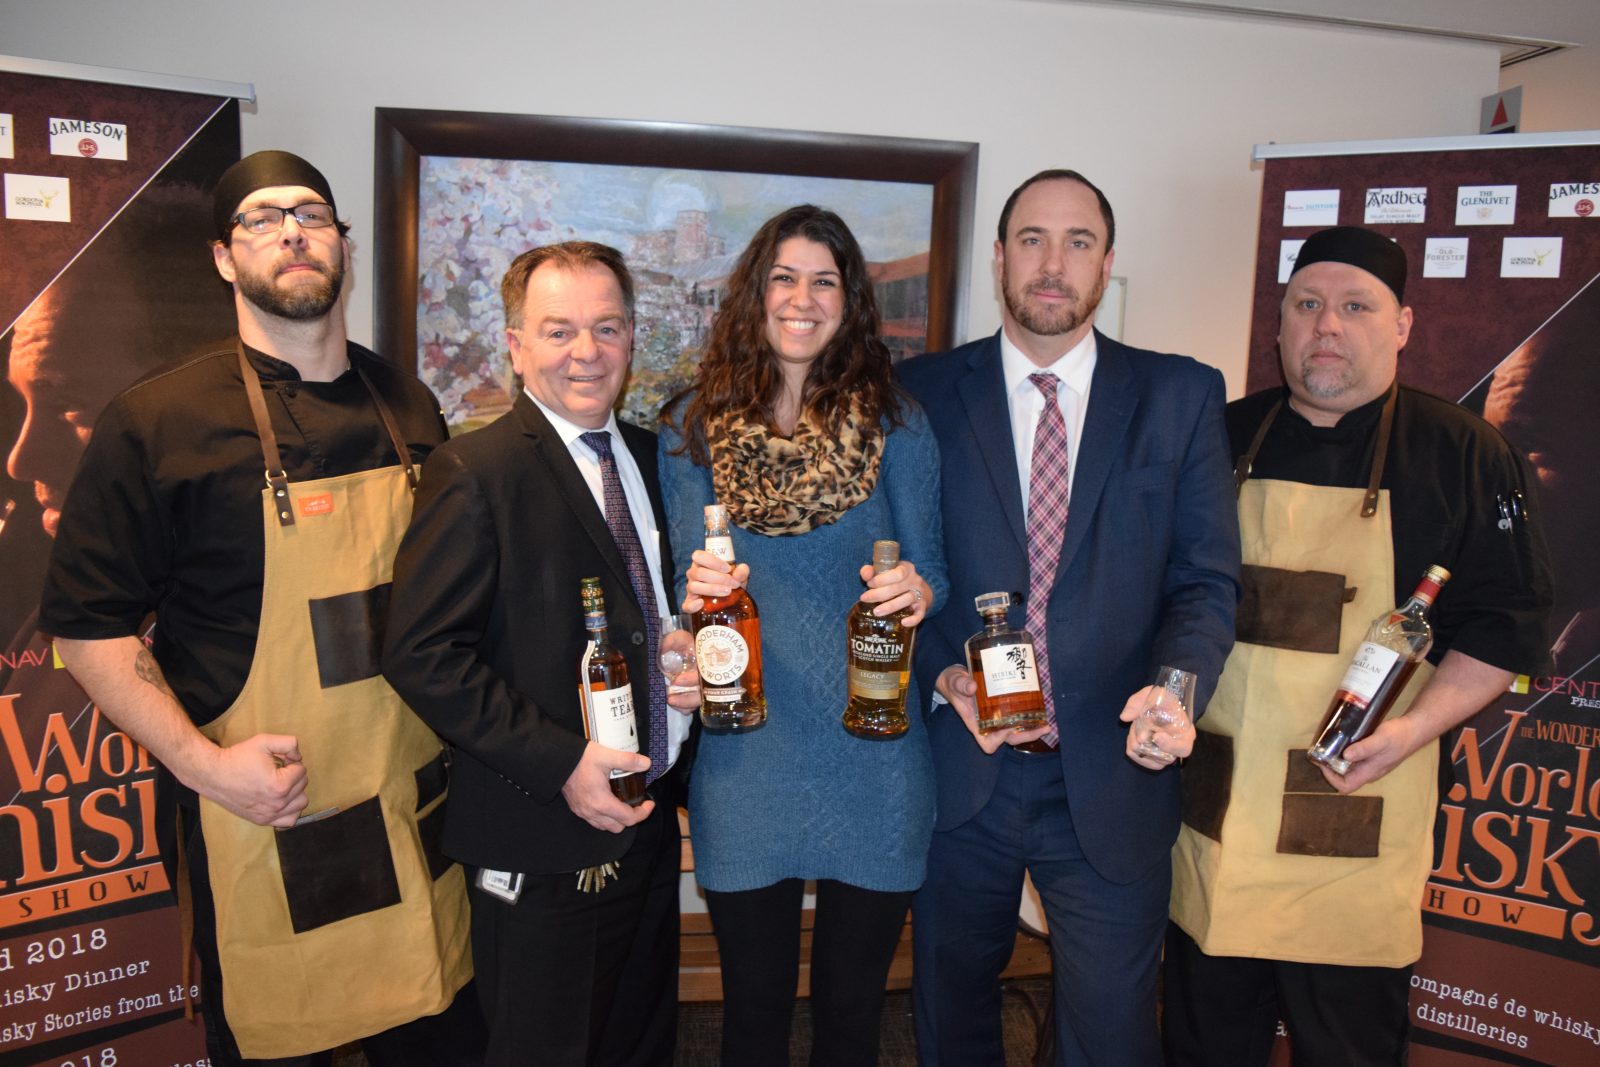 The Wonderful World of Whisky Show is returning to Cornwall